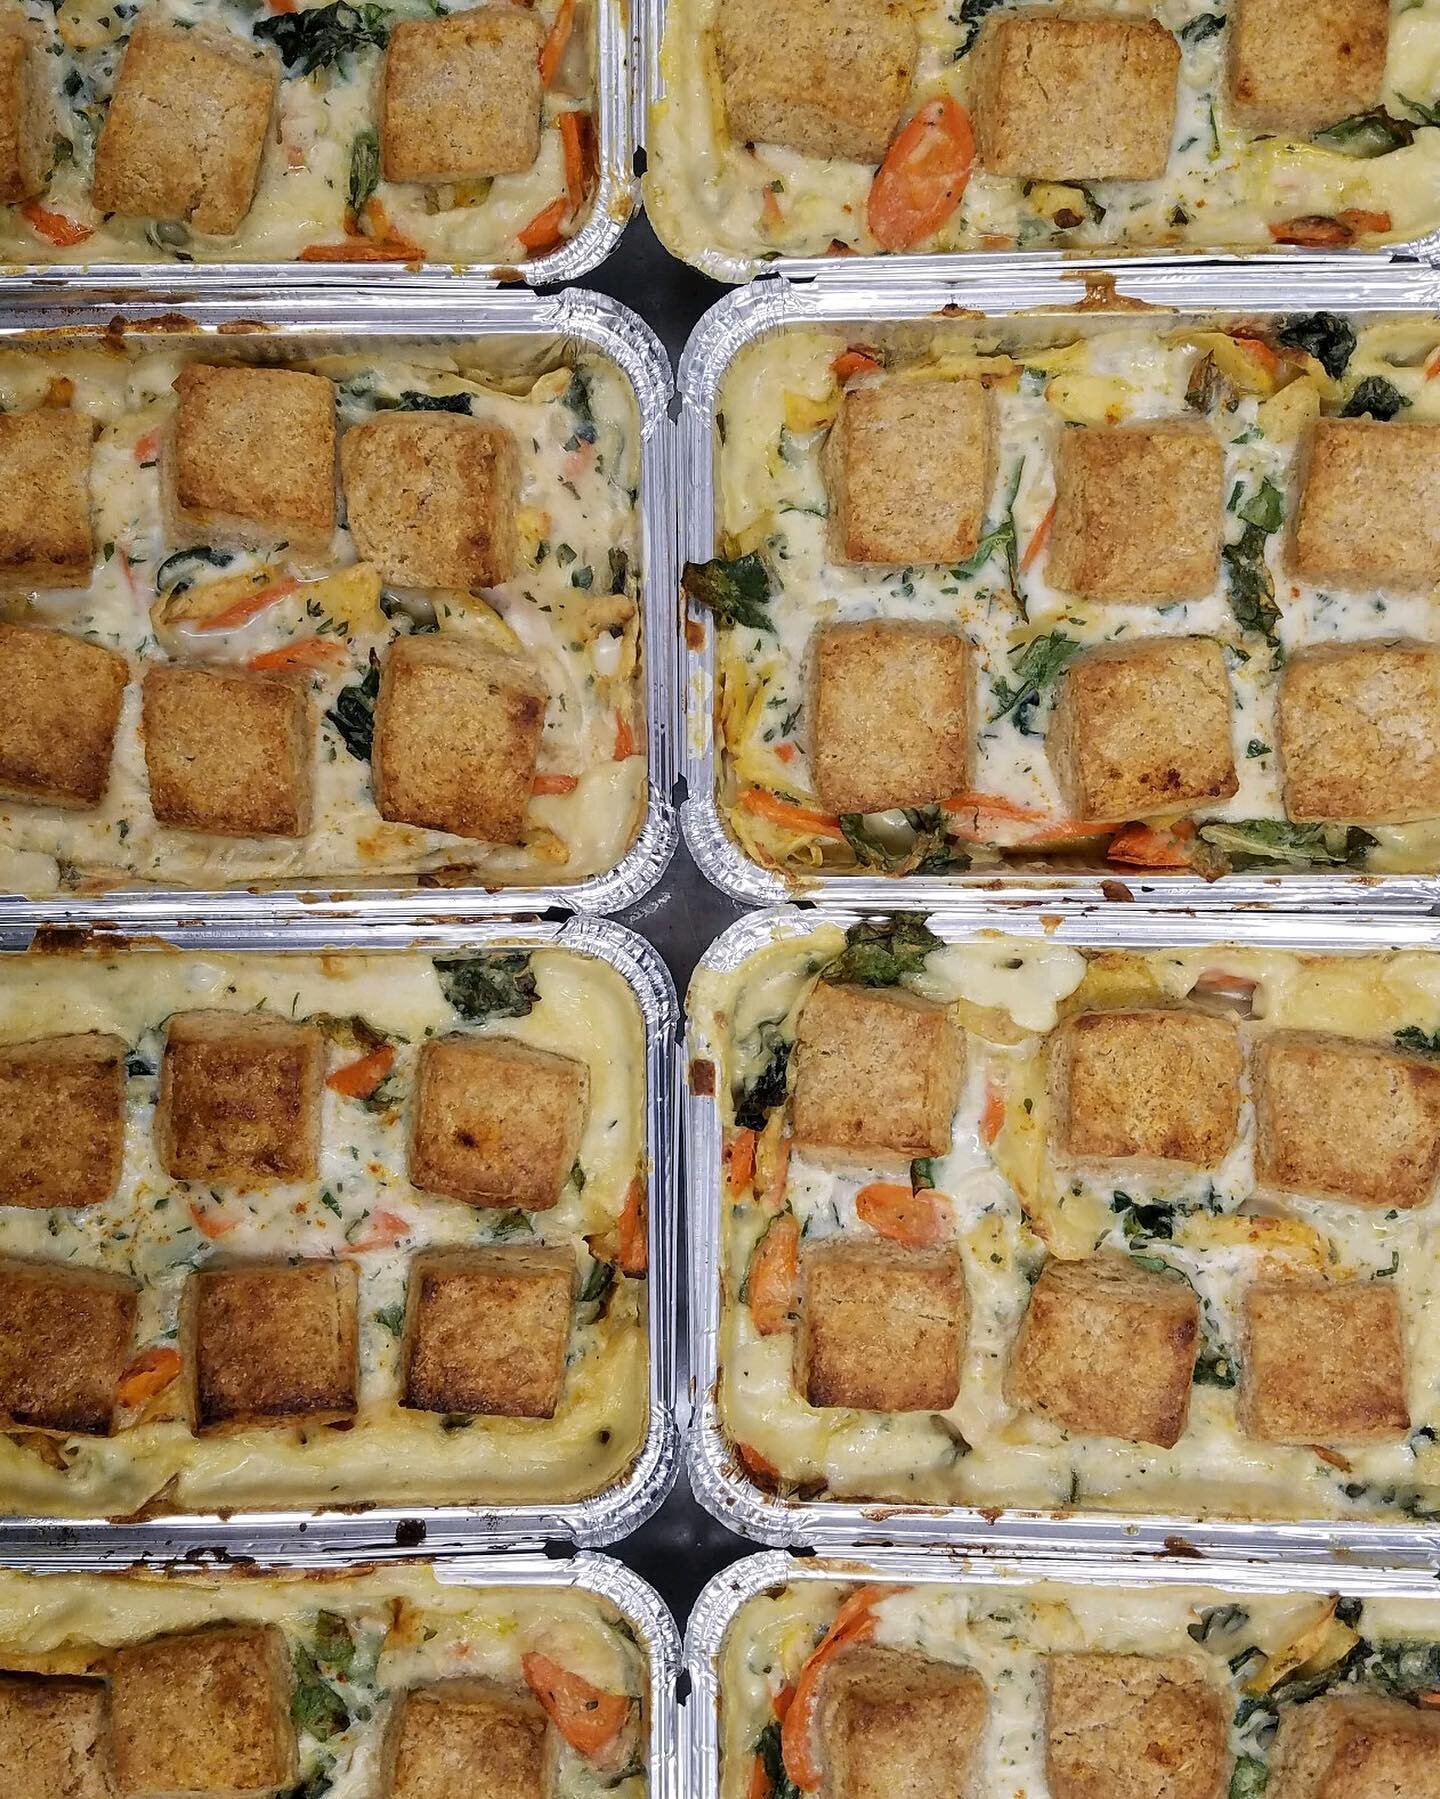 🚨 Wednesday Supper 🚨 Biscuit pot pie - roasted veggie or chicken, take your pick. We have limited quantities, so call ahead to reserve yours! Add our lemony green salad, a bottle of wine, and Della 🍪 to round it out. #foodthatmakesyoufeelgood #del